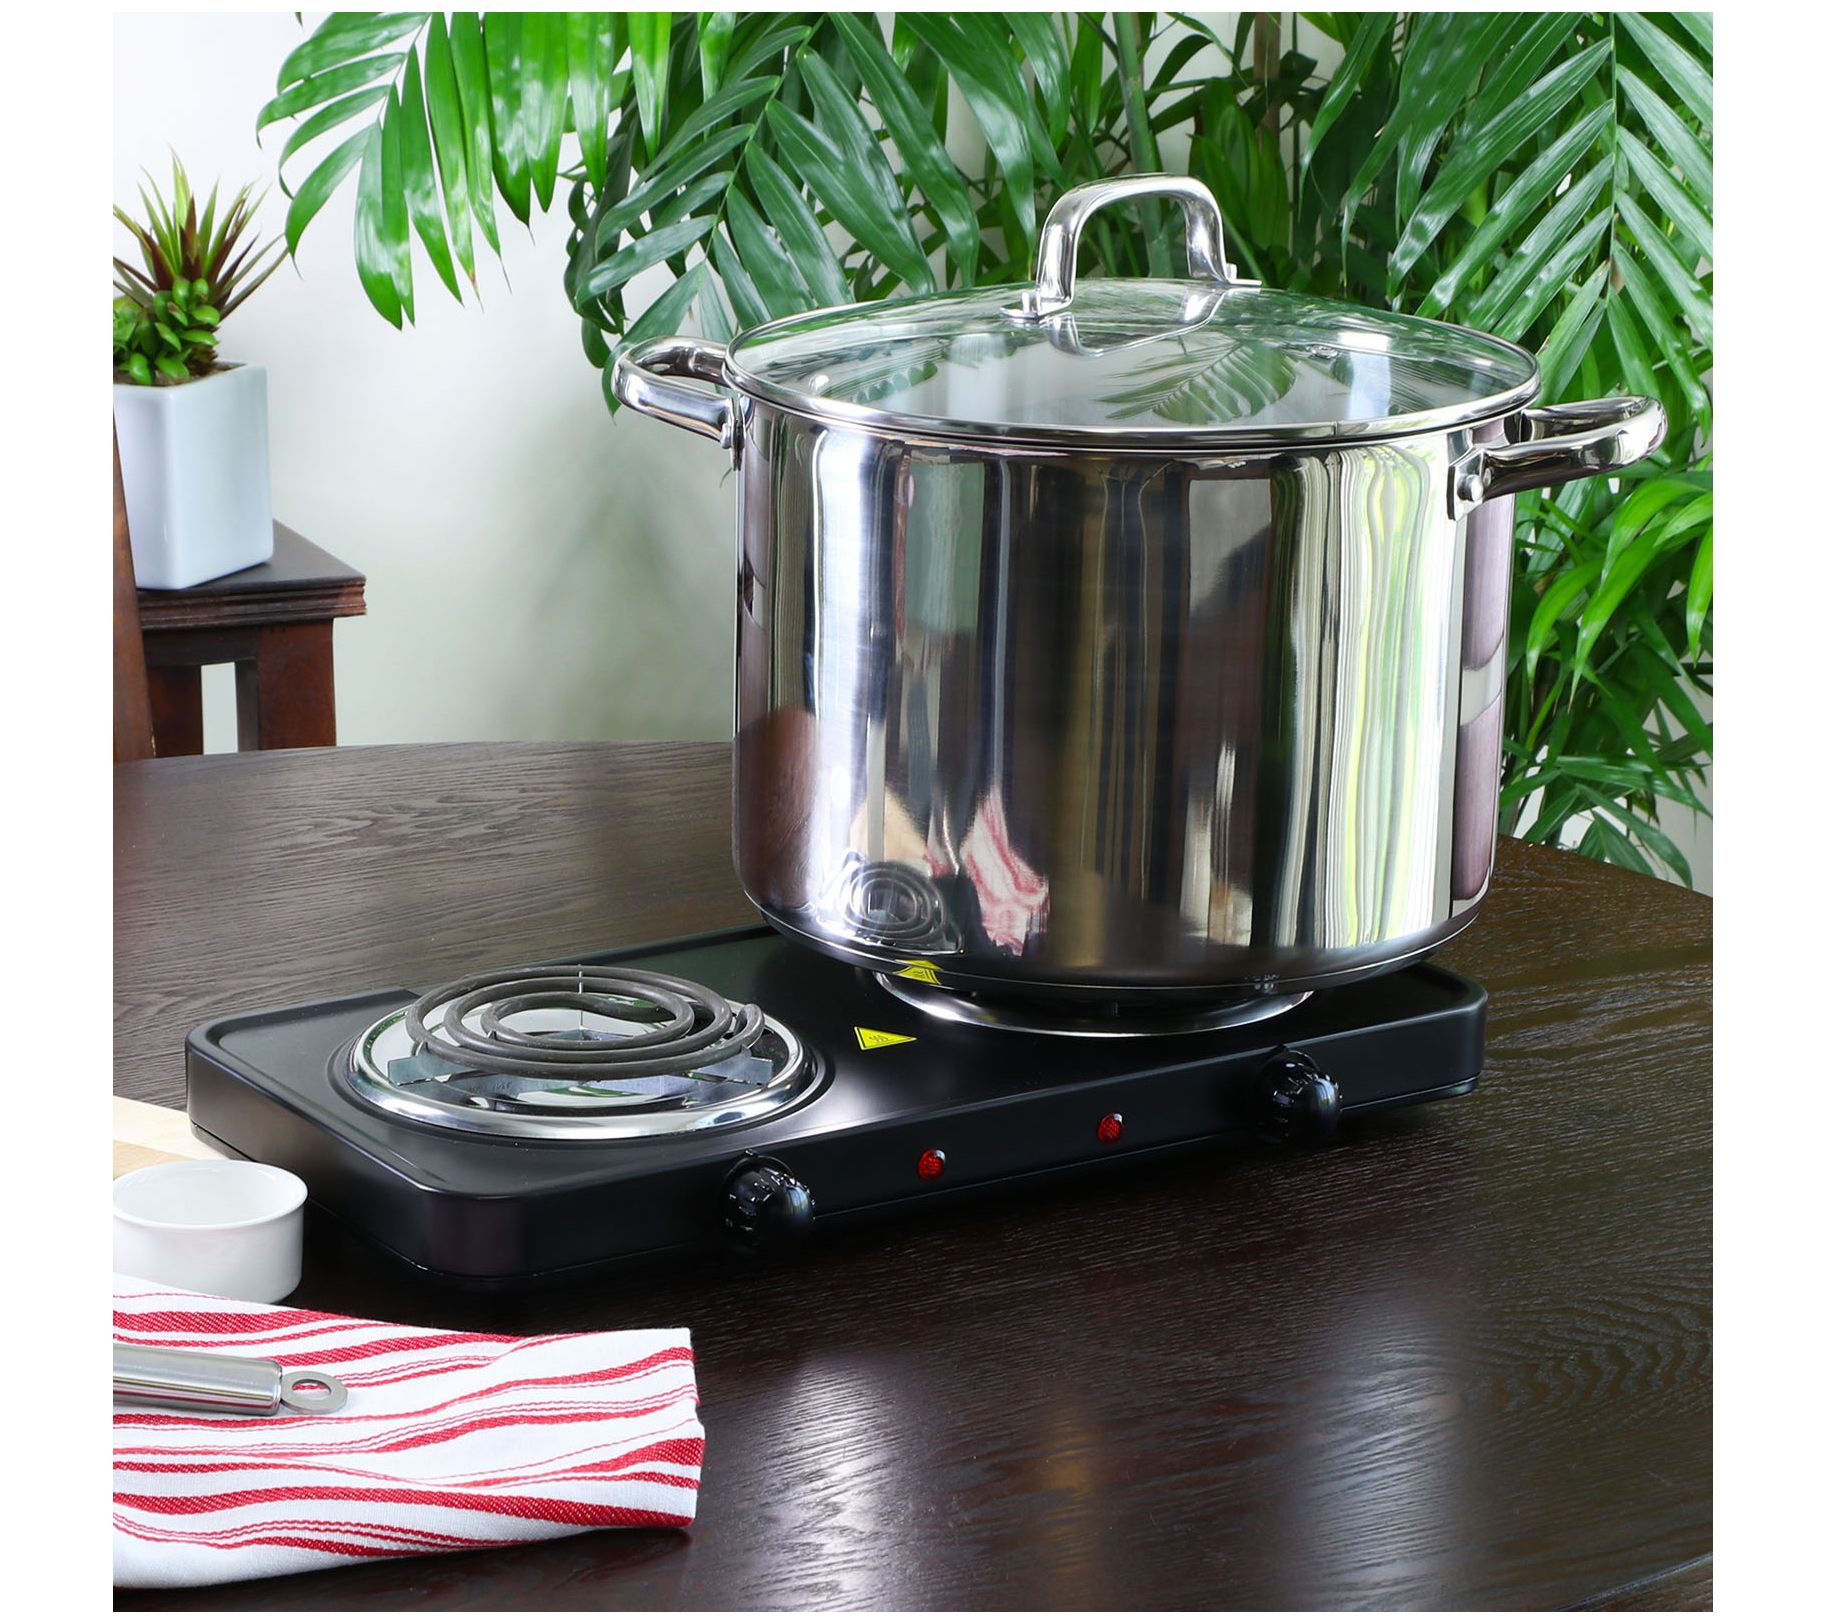 Oster Adenmore 8-Quart Stainless Steel Stock Pot in the Cooking